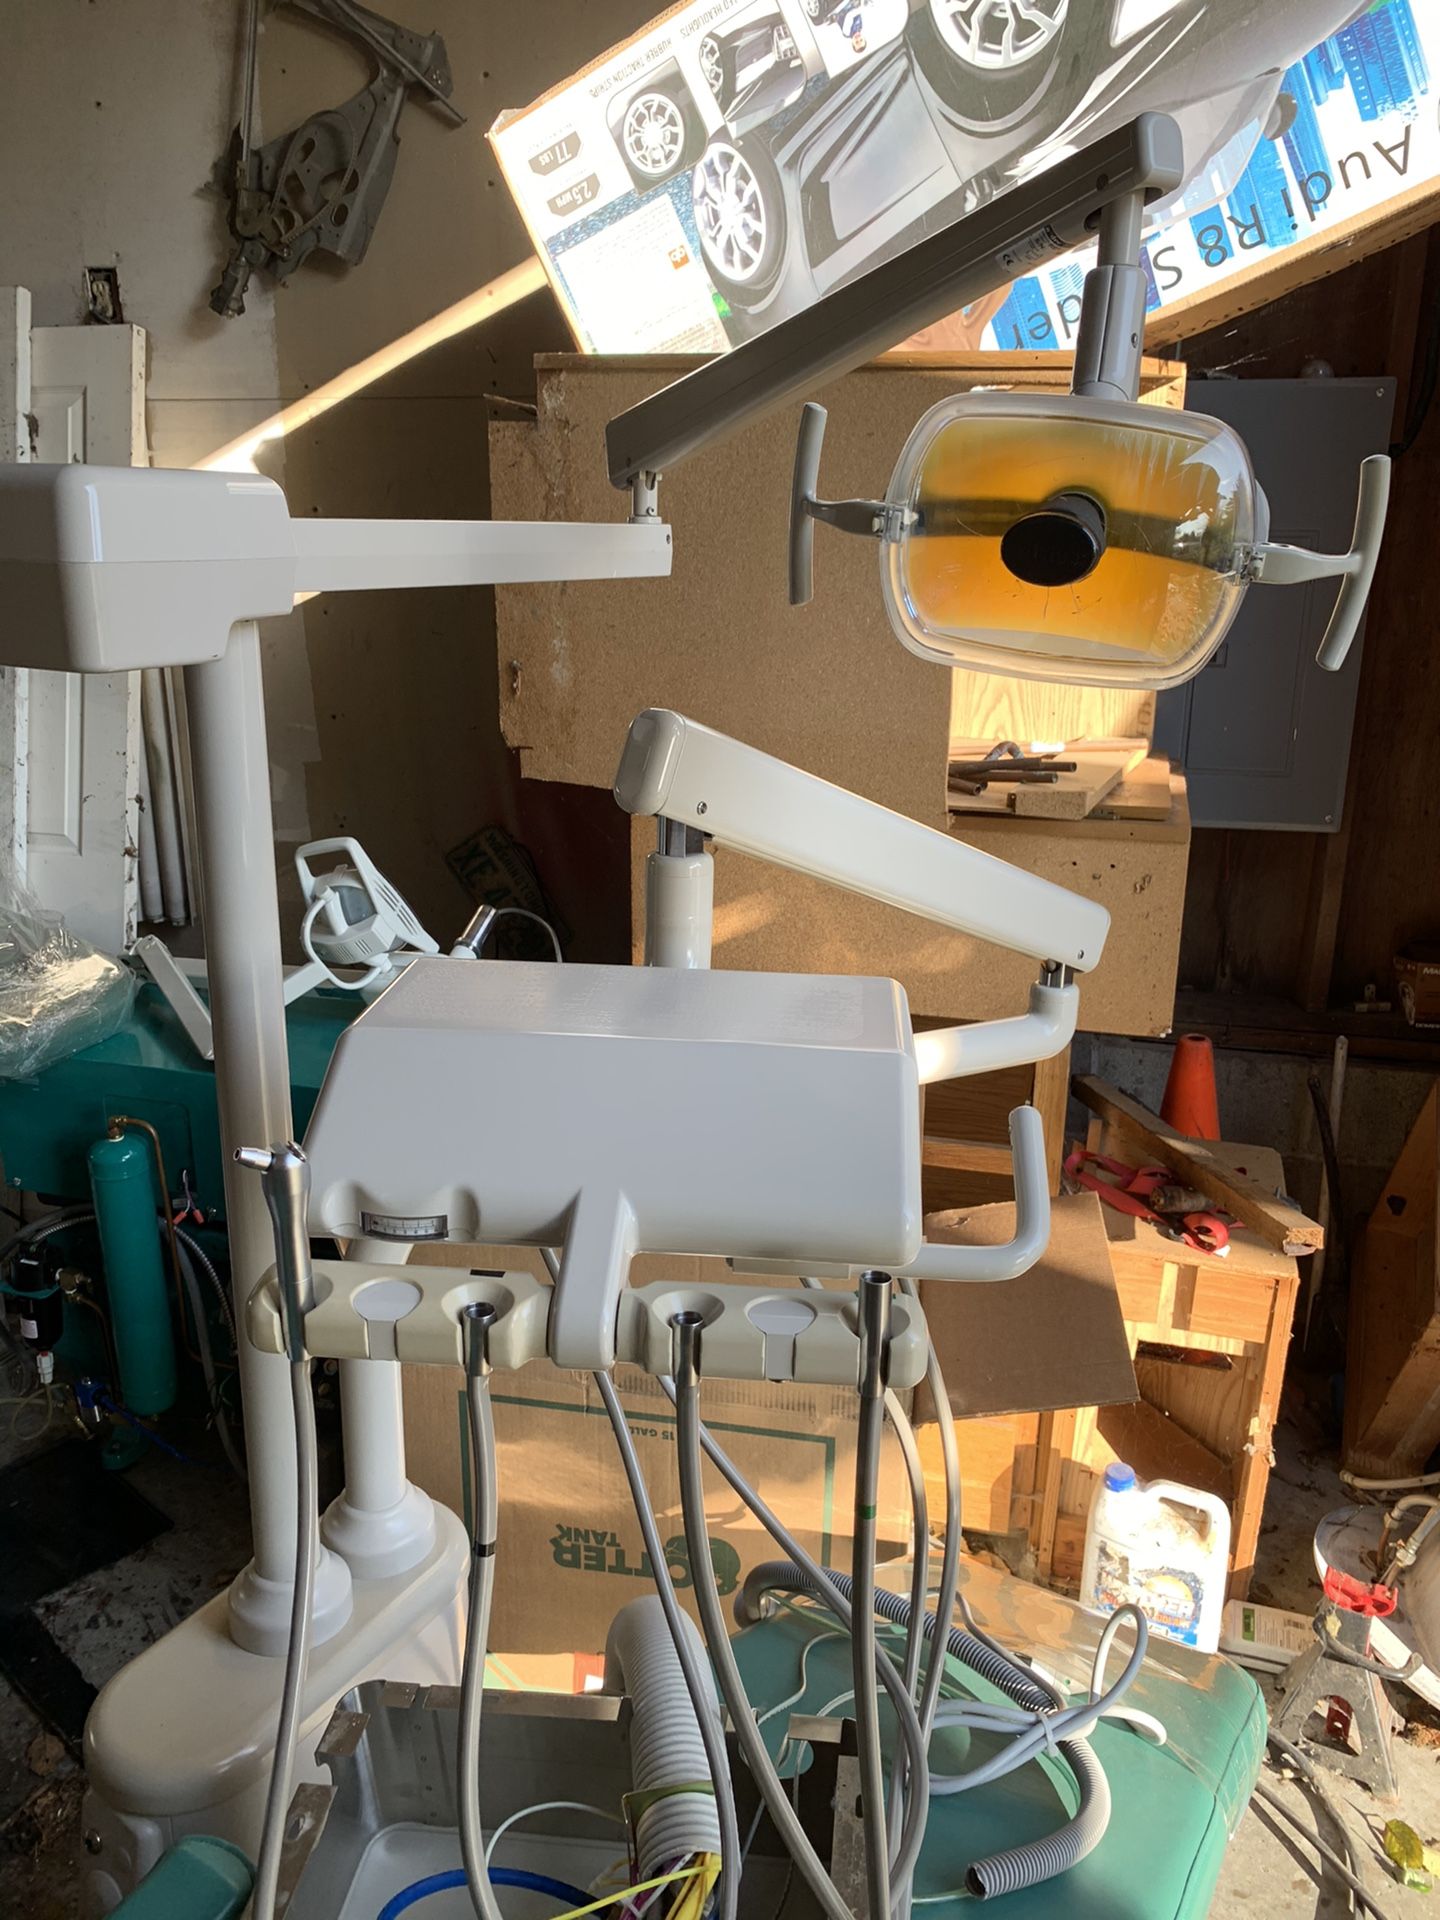 Dental chair with adec delivery unit